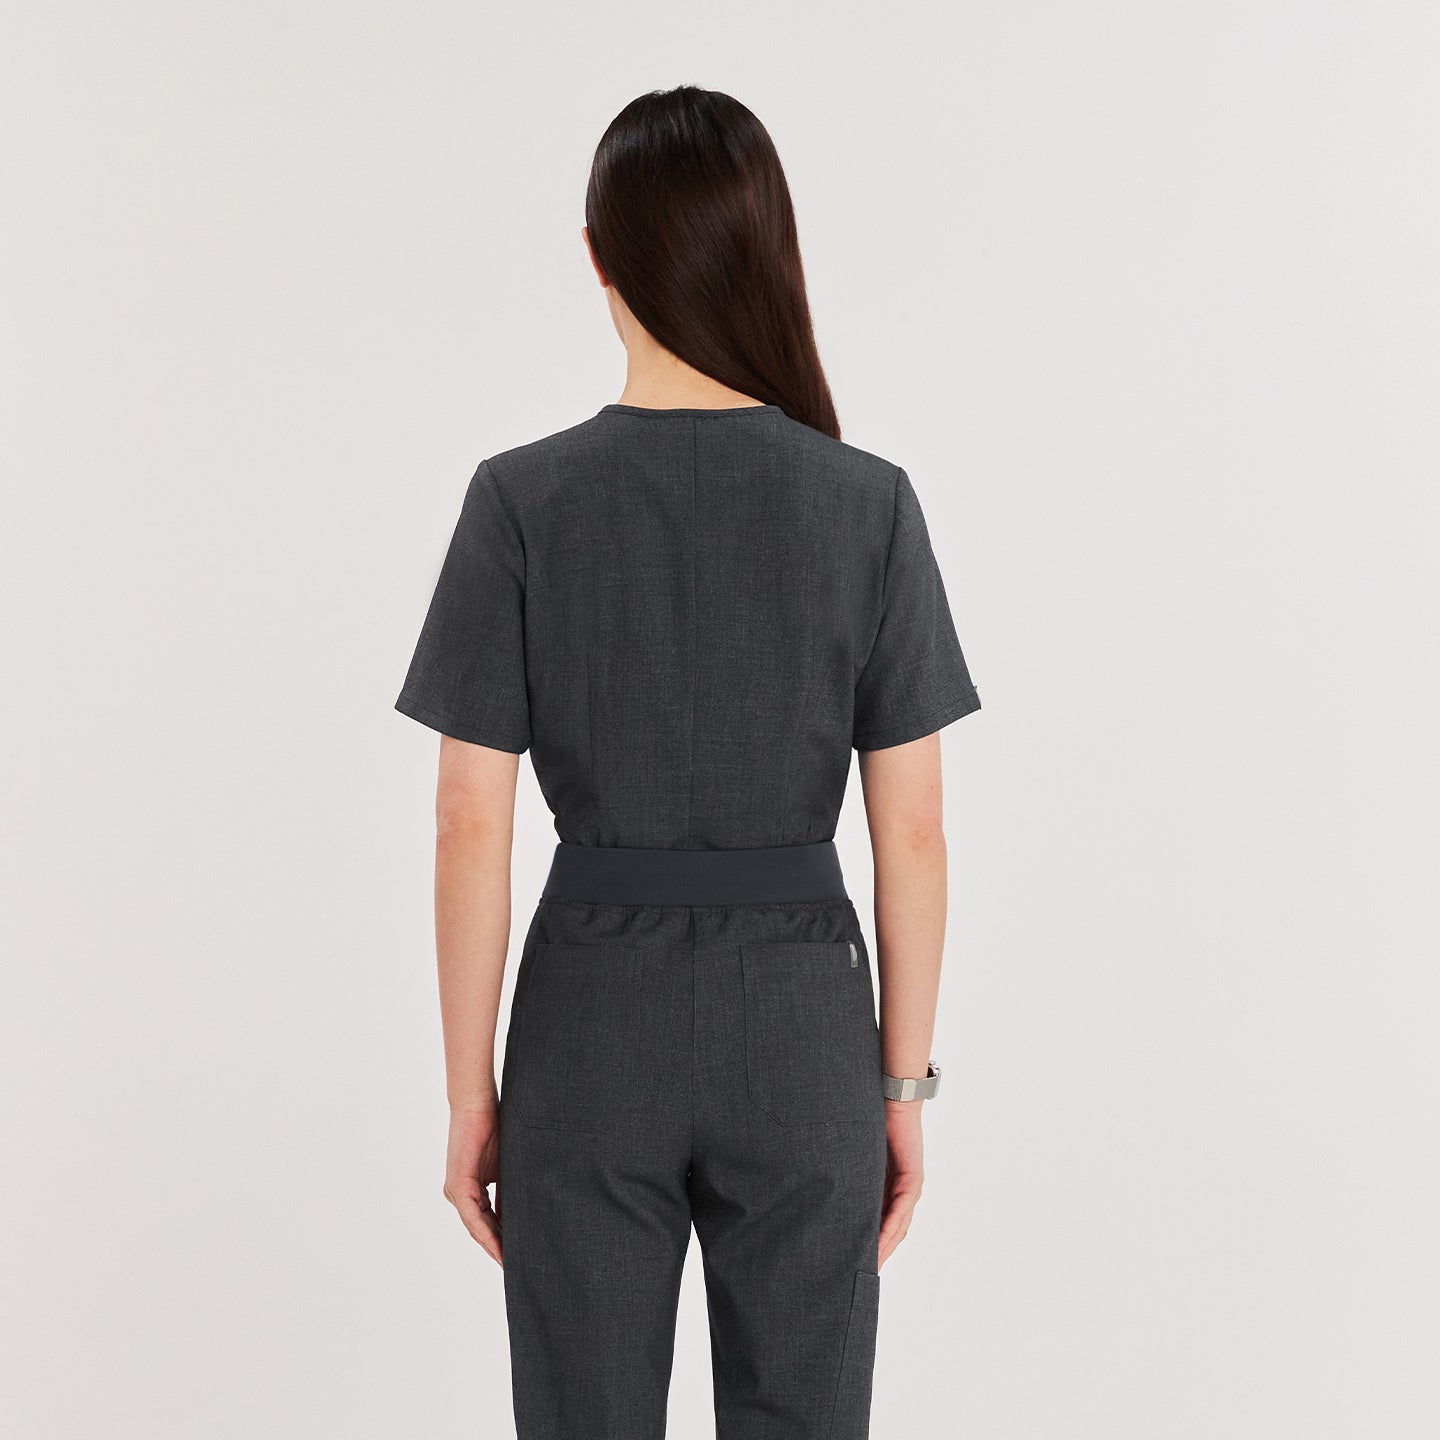 Model facing away, wearing a V-neck scrub top and matching pants with a drawstring waist,Charcoal Gray